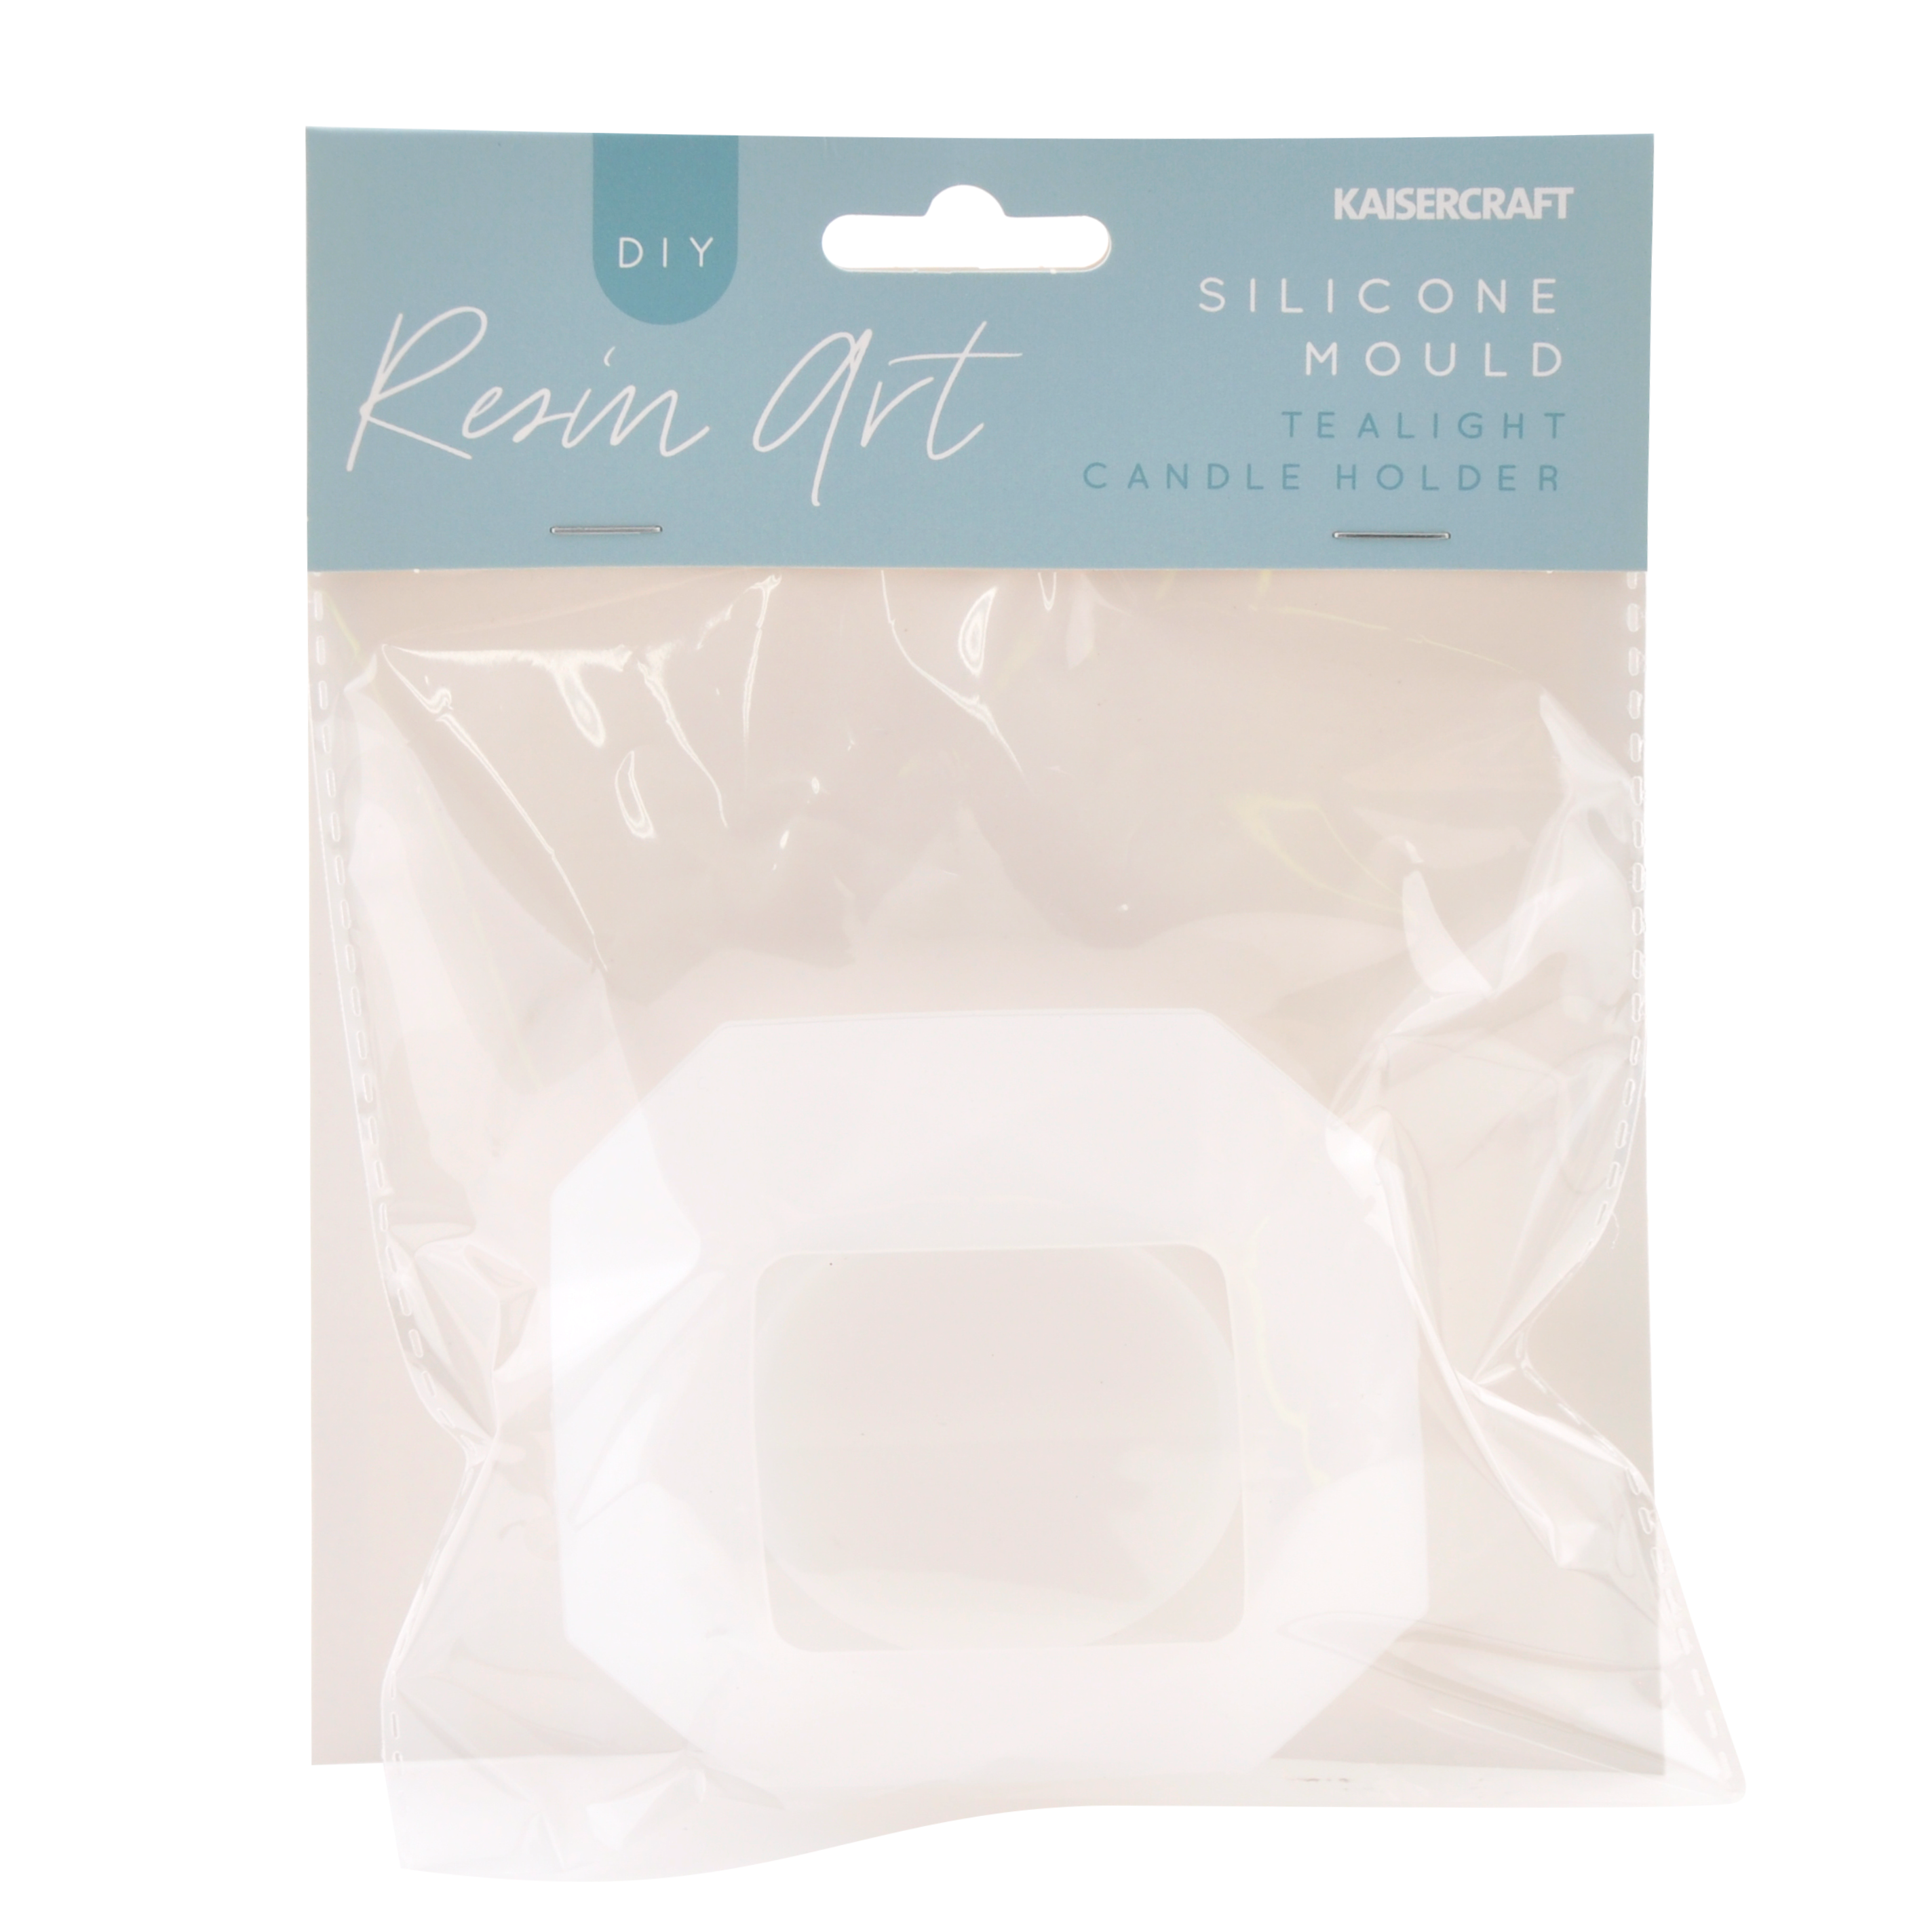 Kaisercraft Resin Silicone Mould - Tealight Candle